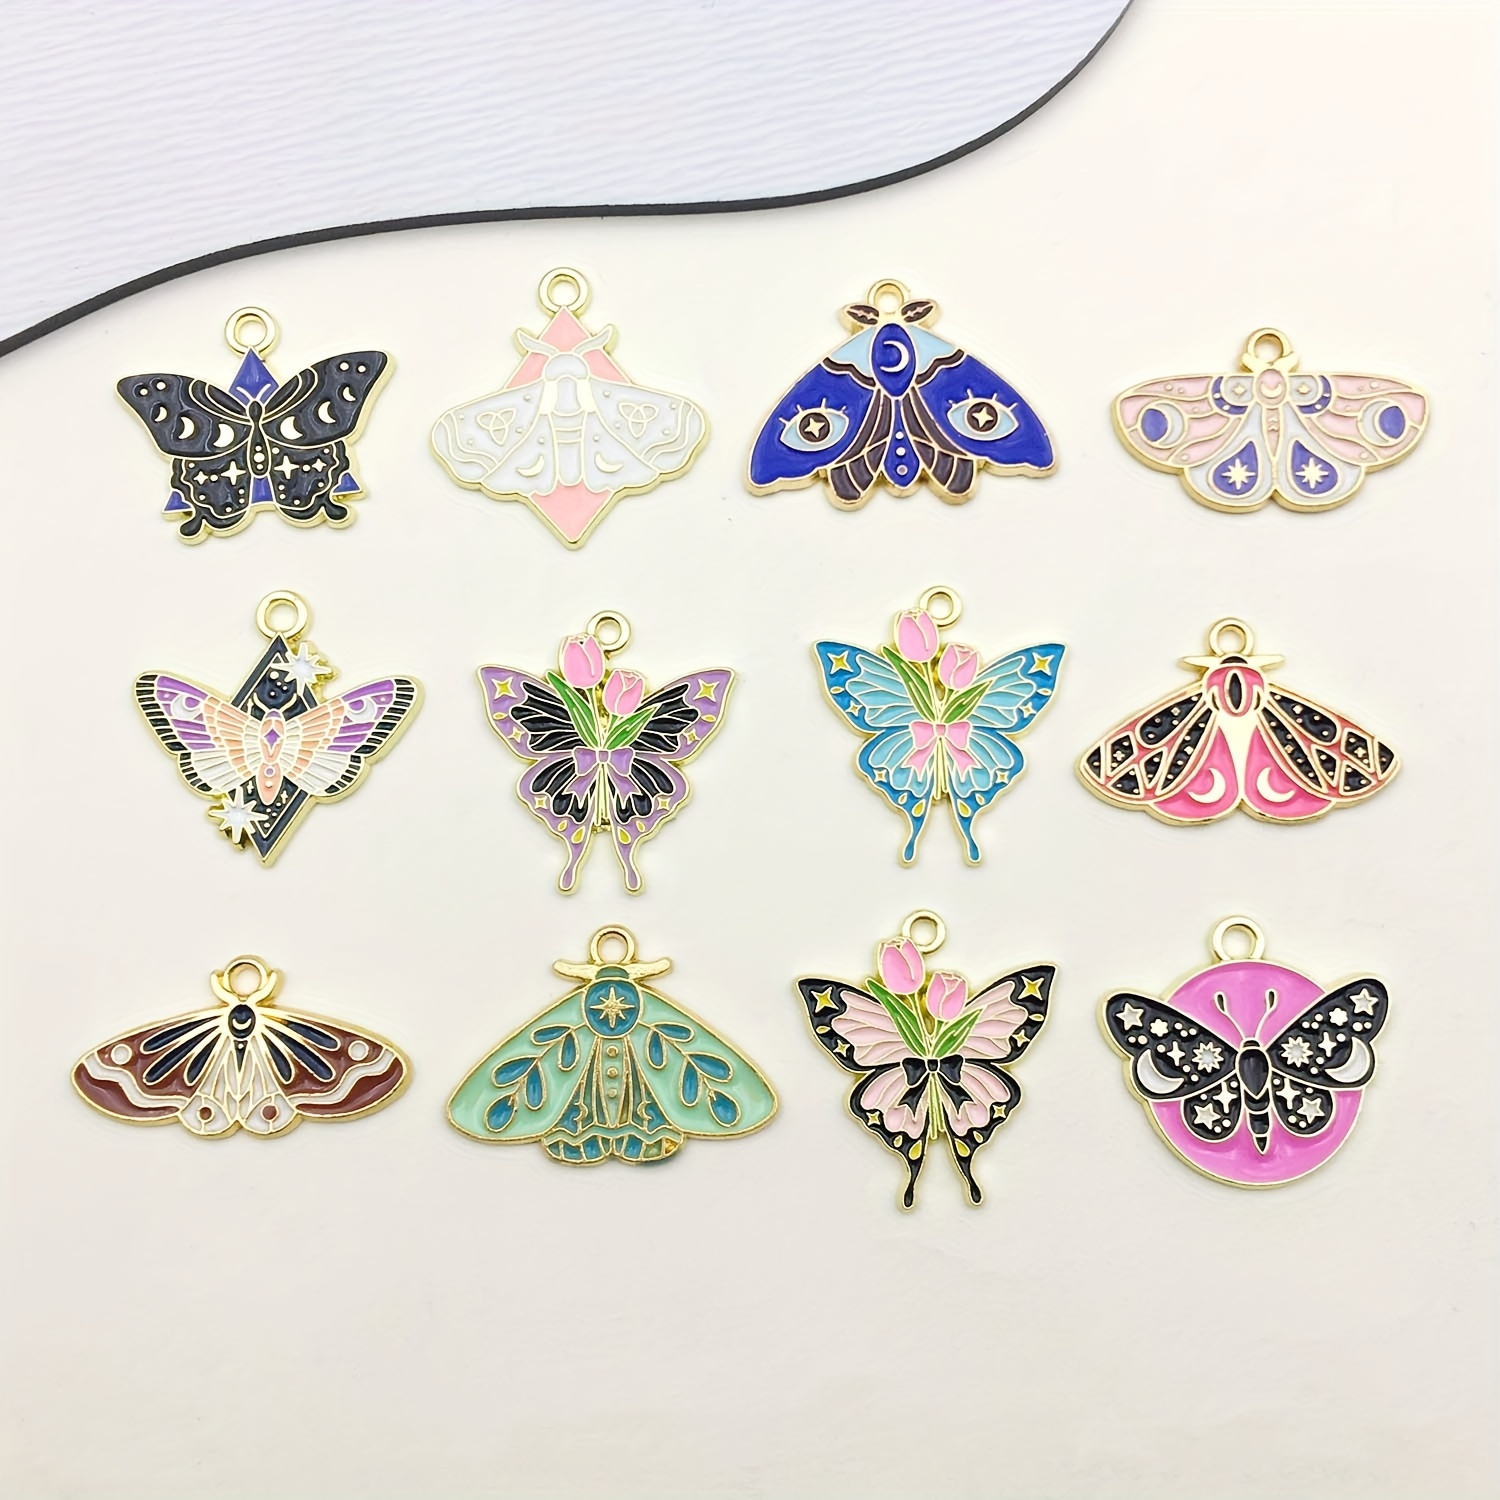 

12pcs Alloy Enamel Colorful Exquisitemoth Butterfly Design Charms For Diy Bracelet Necklace Jewelry Making Accessories